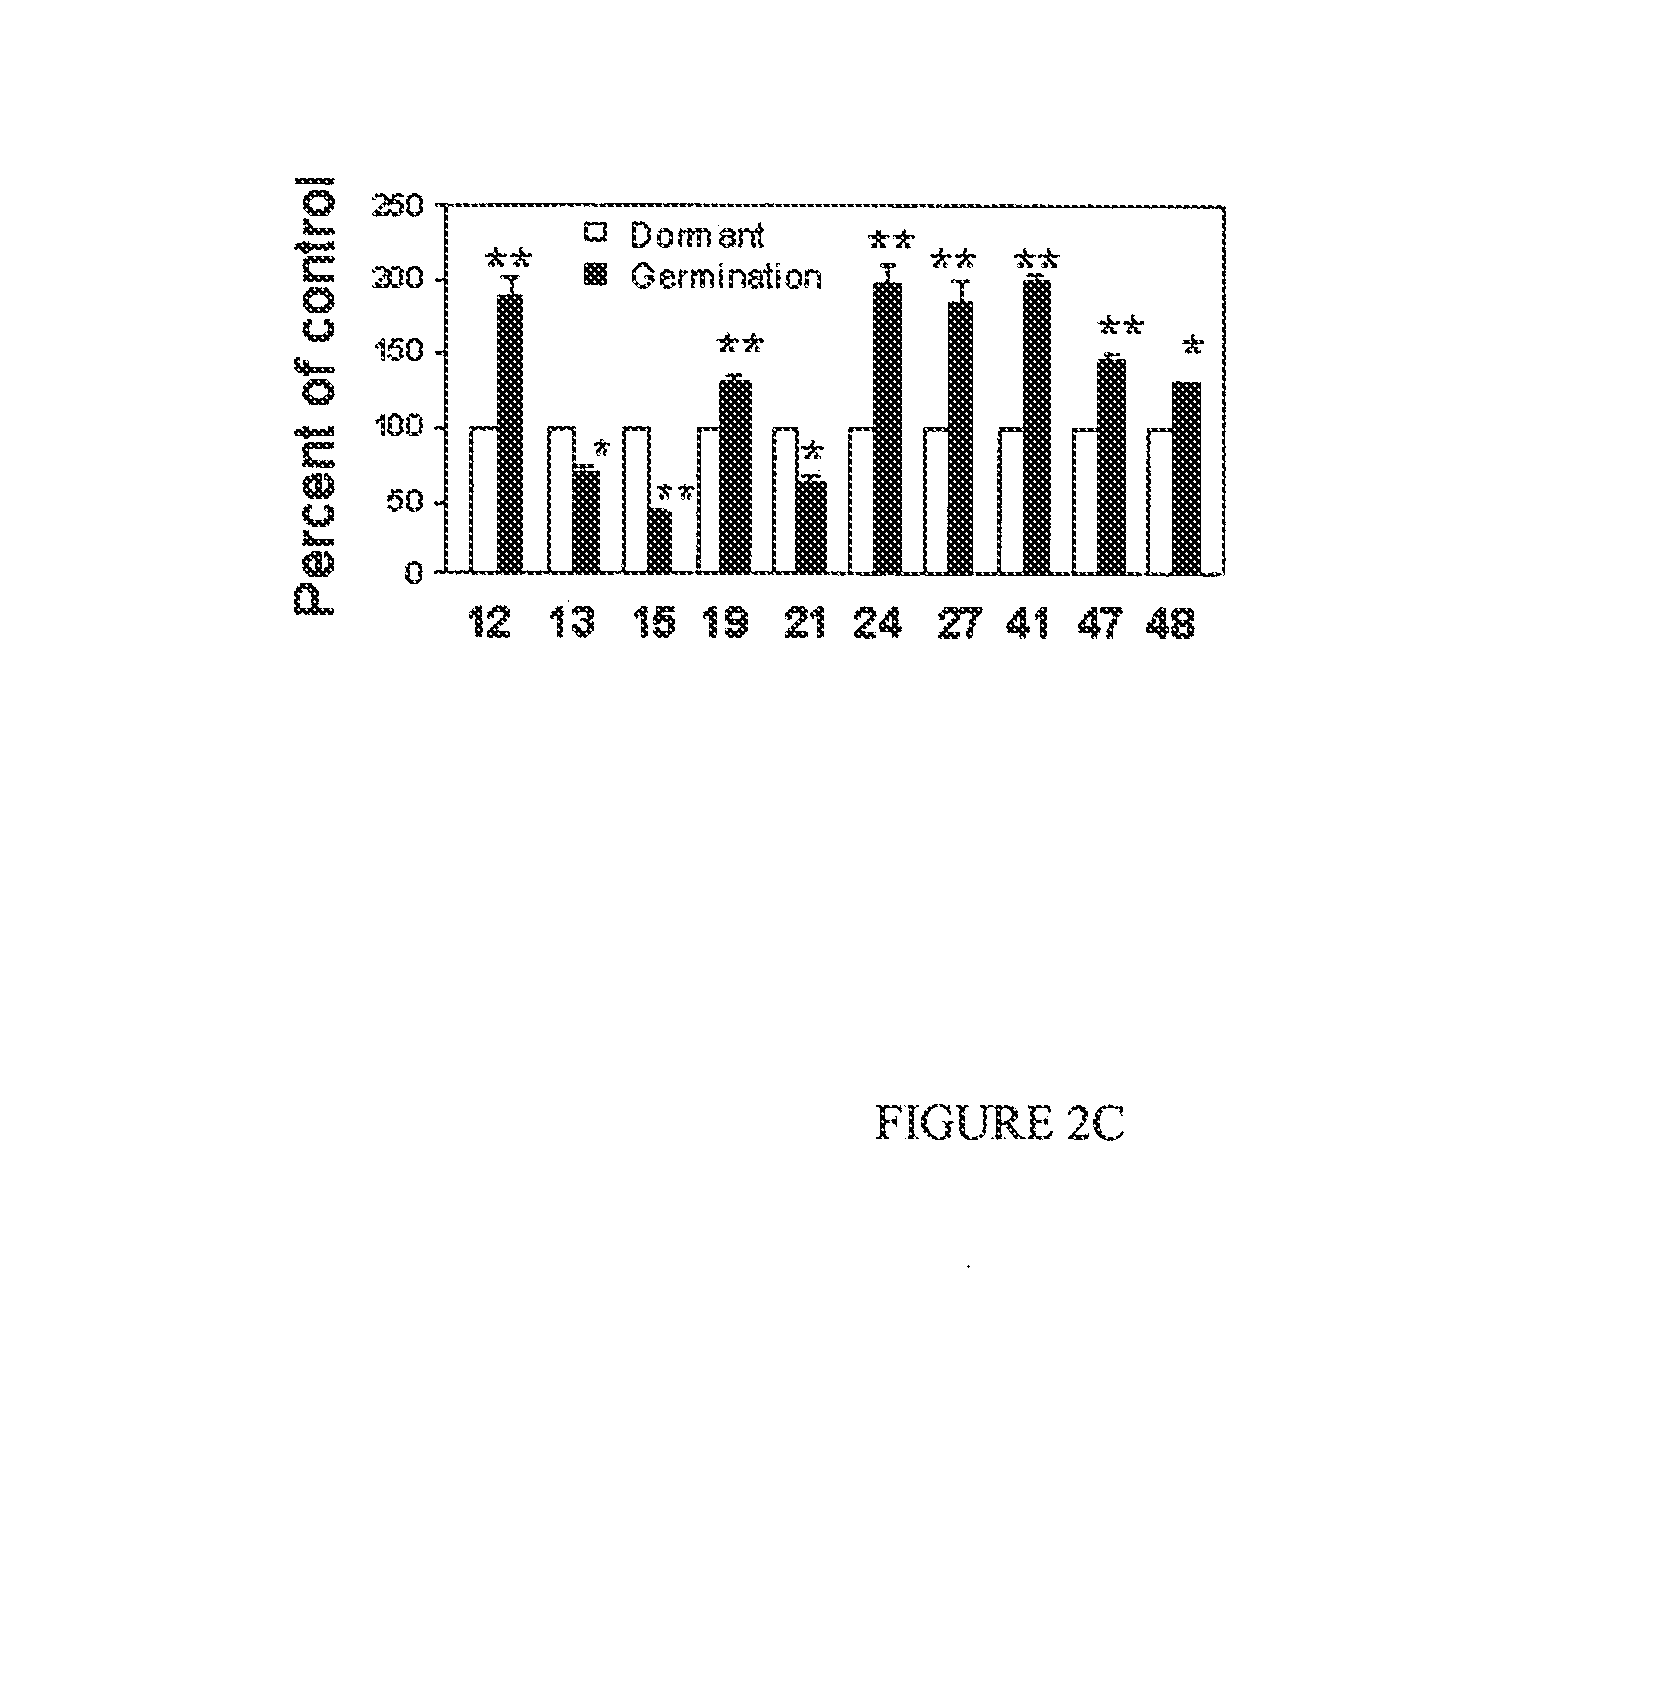 Targets and compositions for use in decontamination, immunoprophylaxis, and post-exposure therapy against anthrax